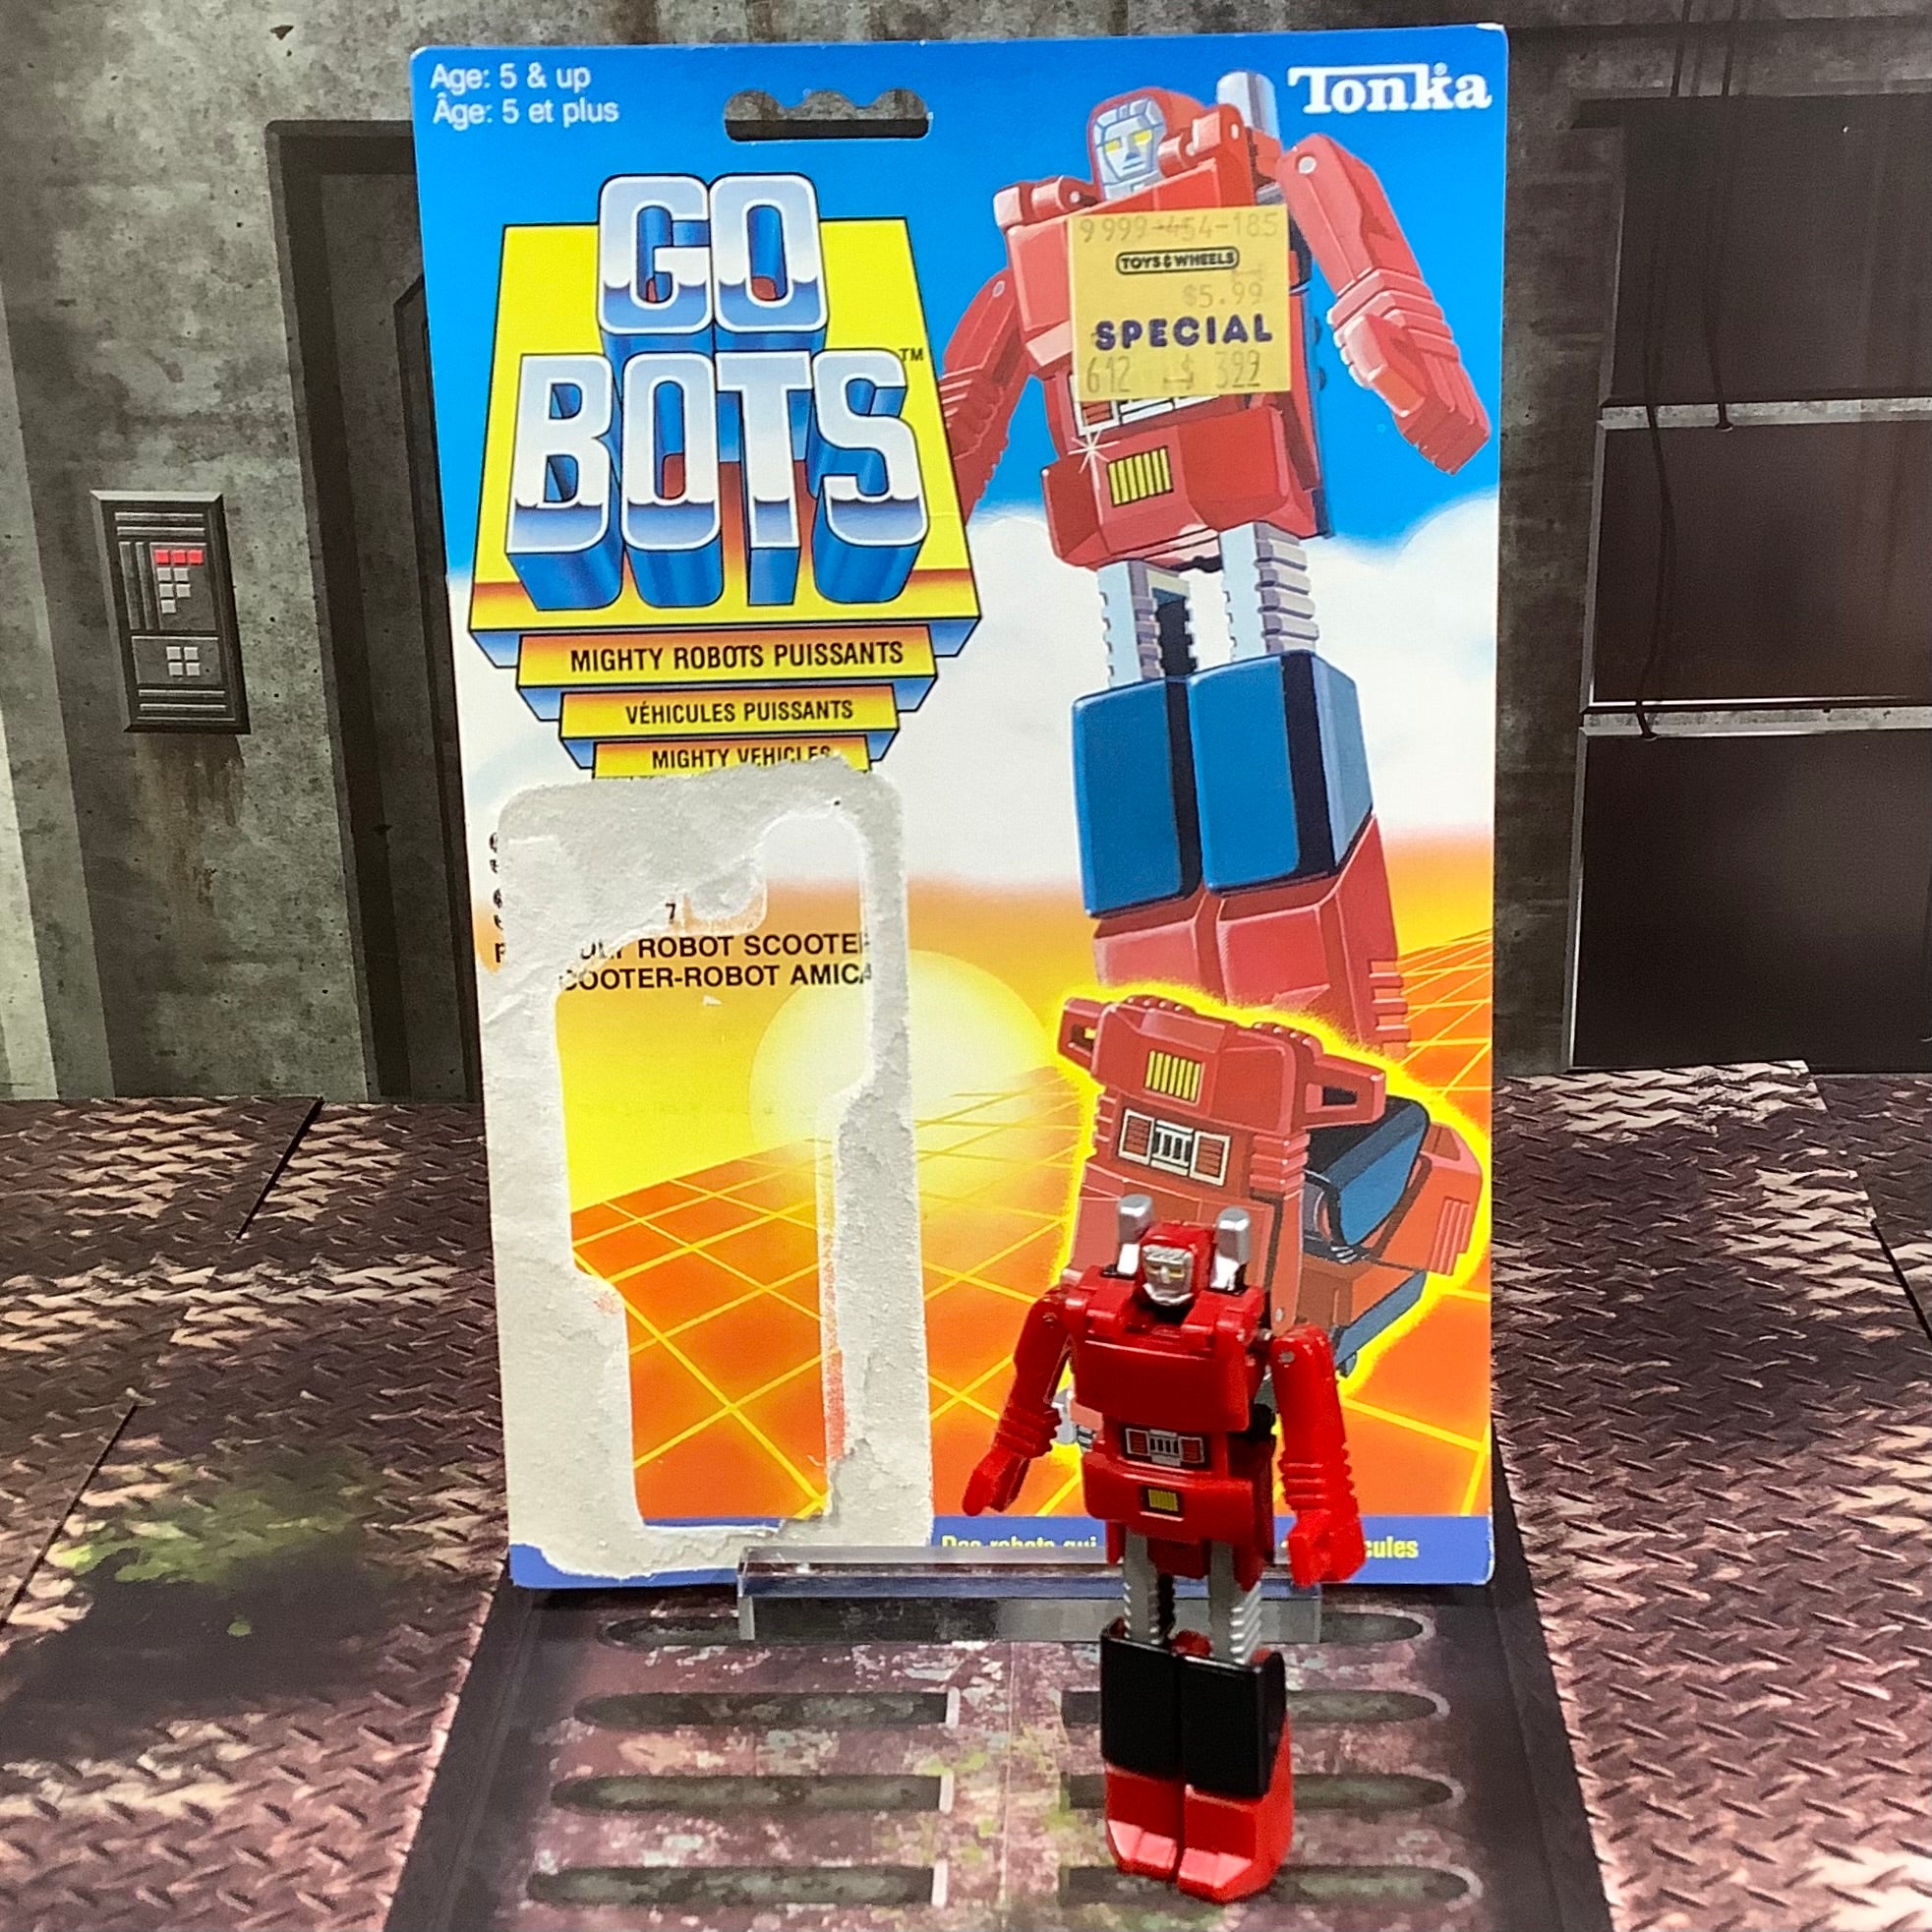 1983 Gobot - Scooter (W/Card)